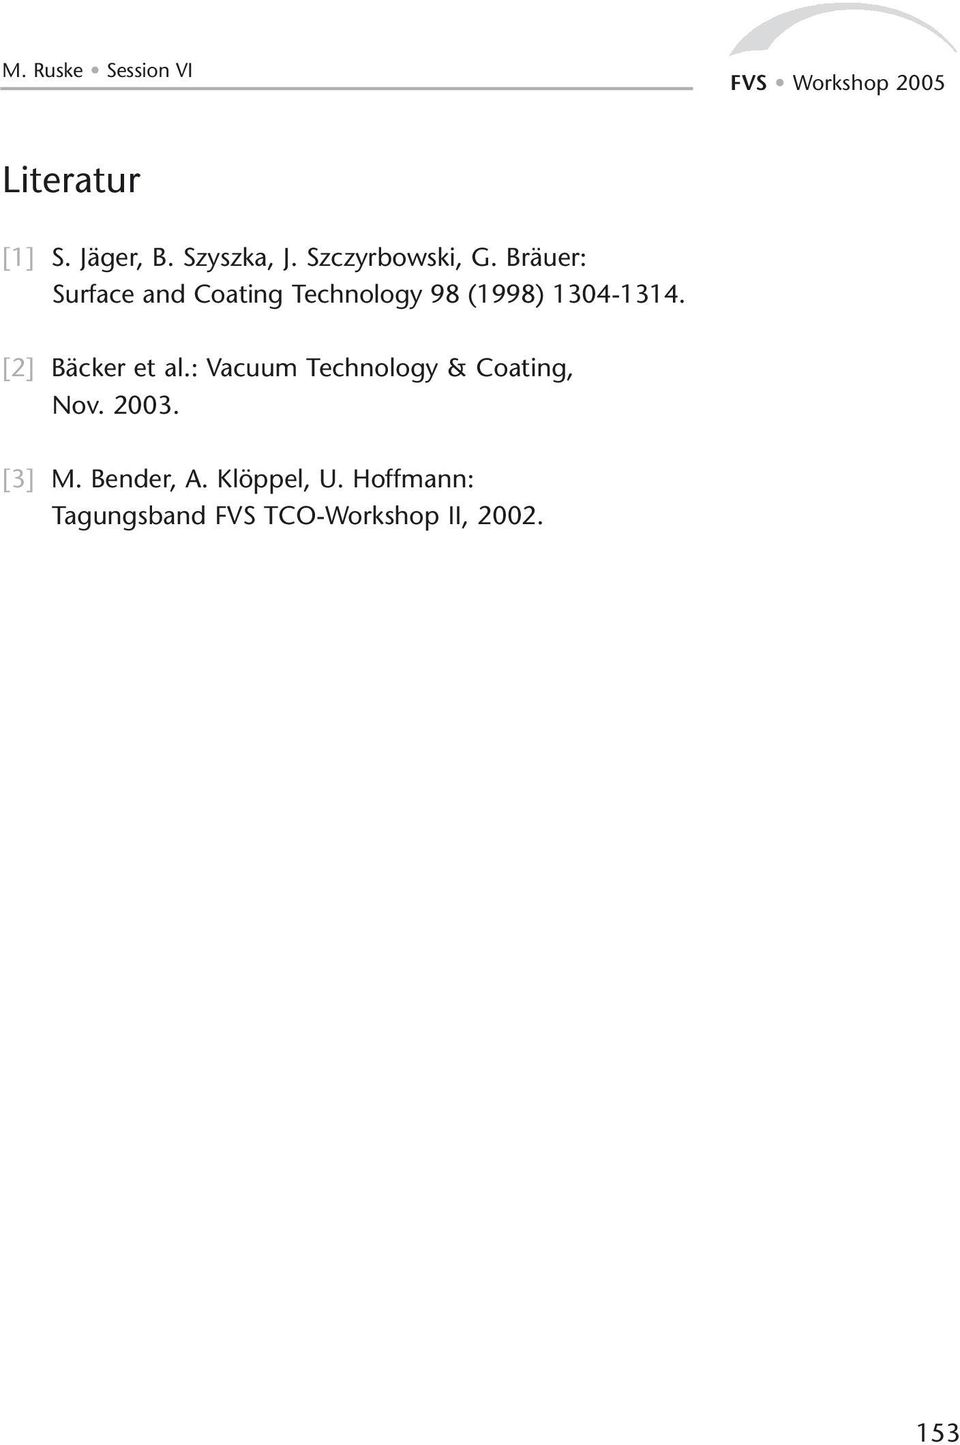 Bräuer: Surface and Coating Technology 98 (1998) 1304-1314.